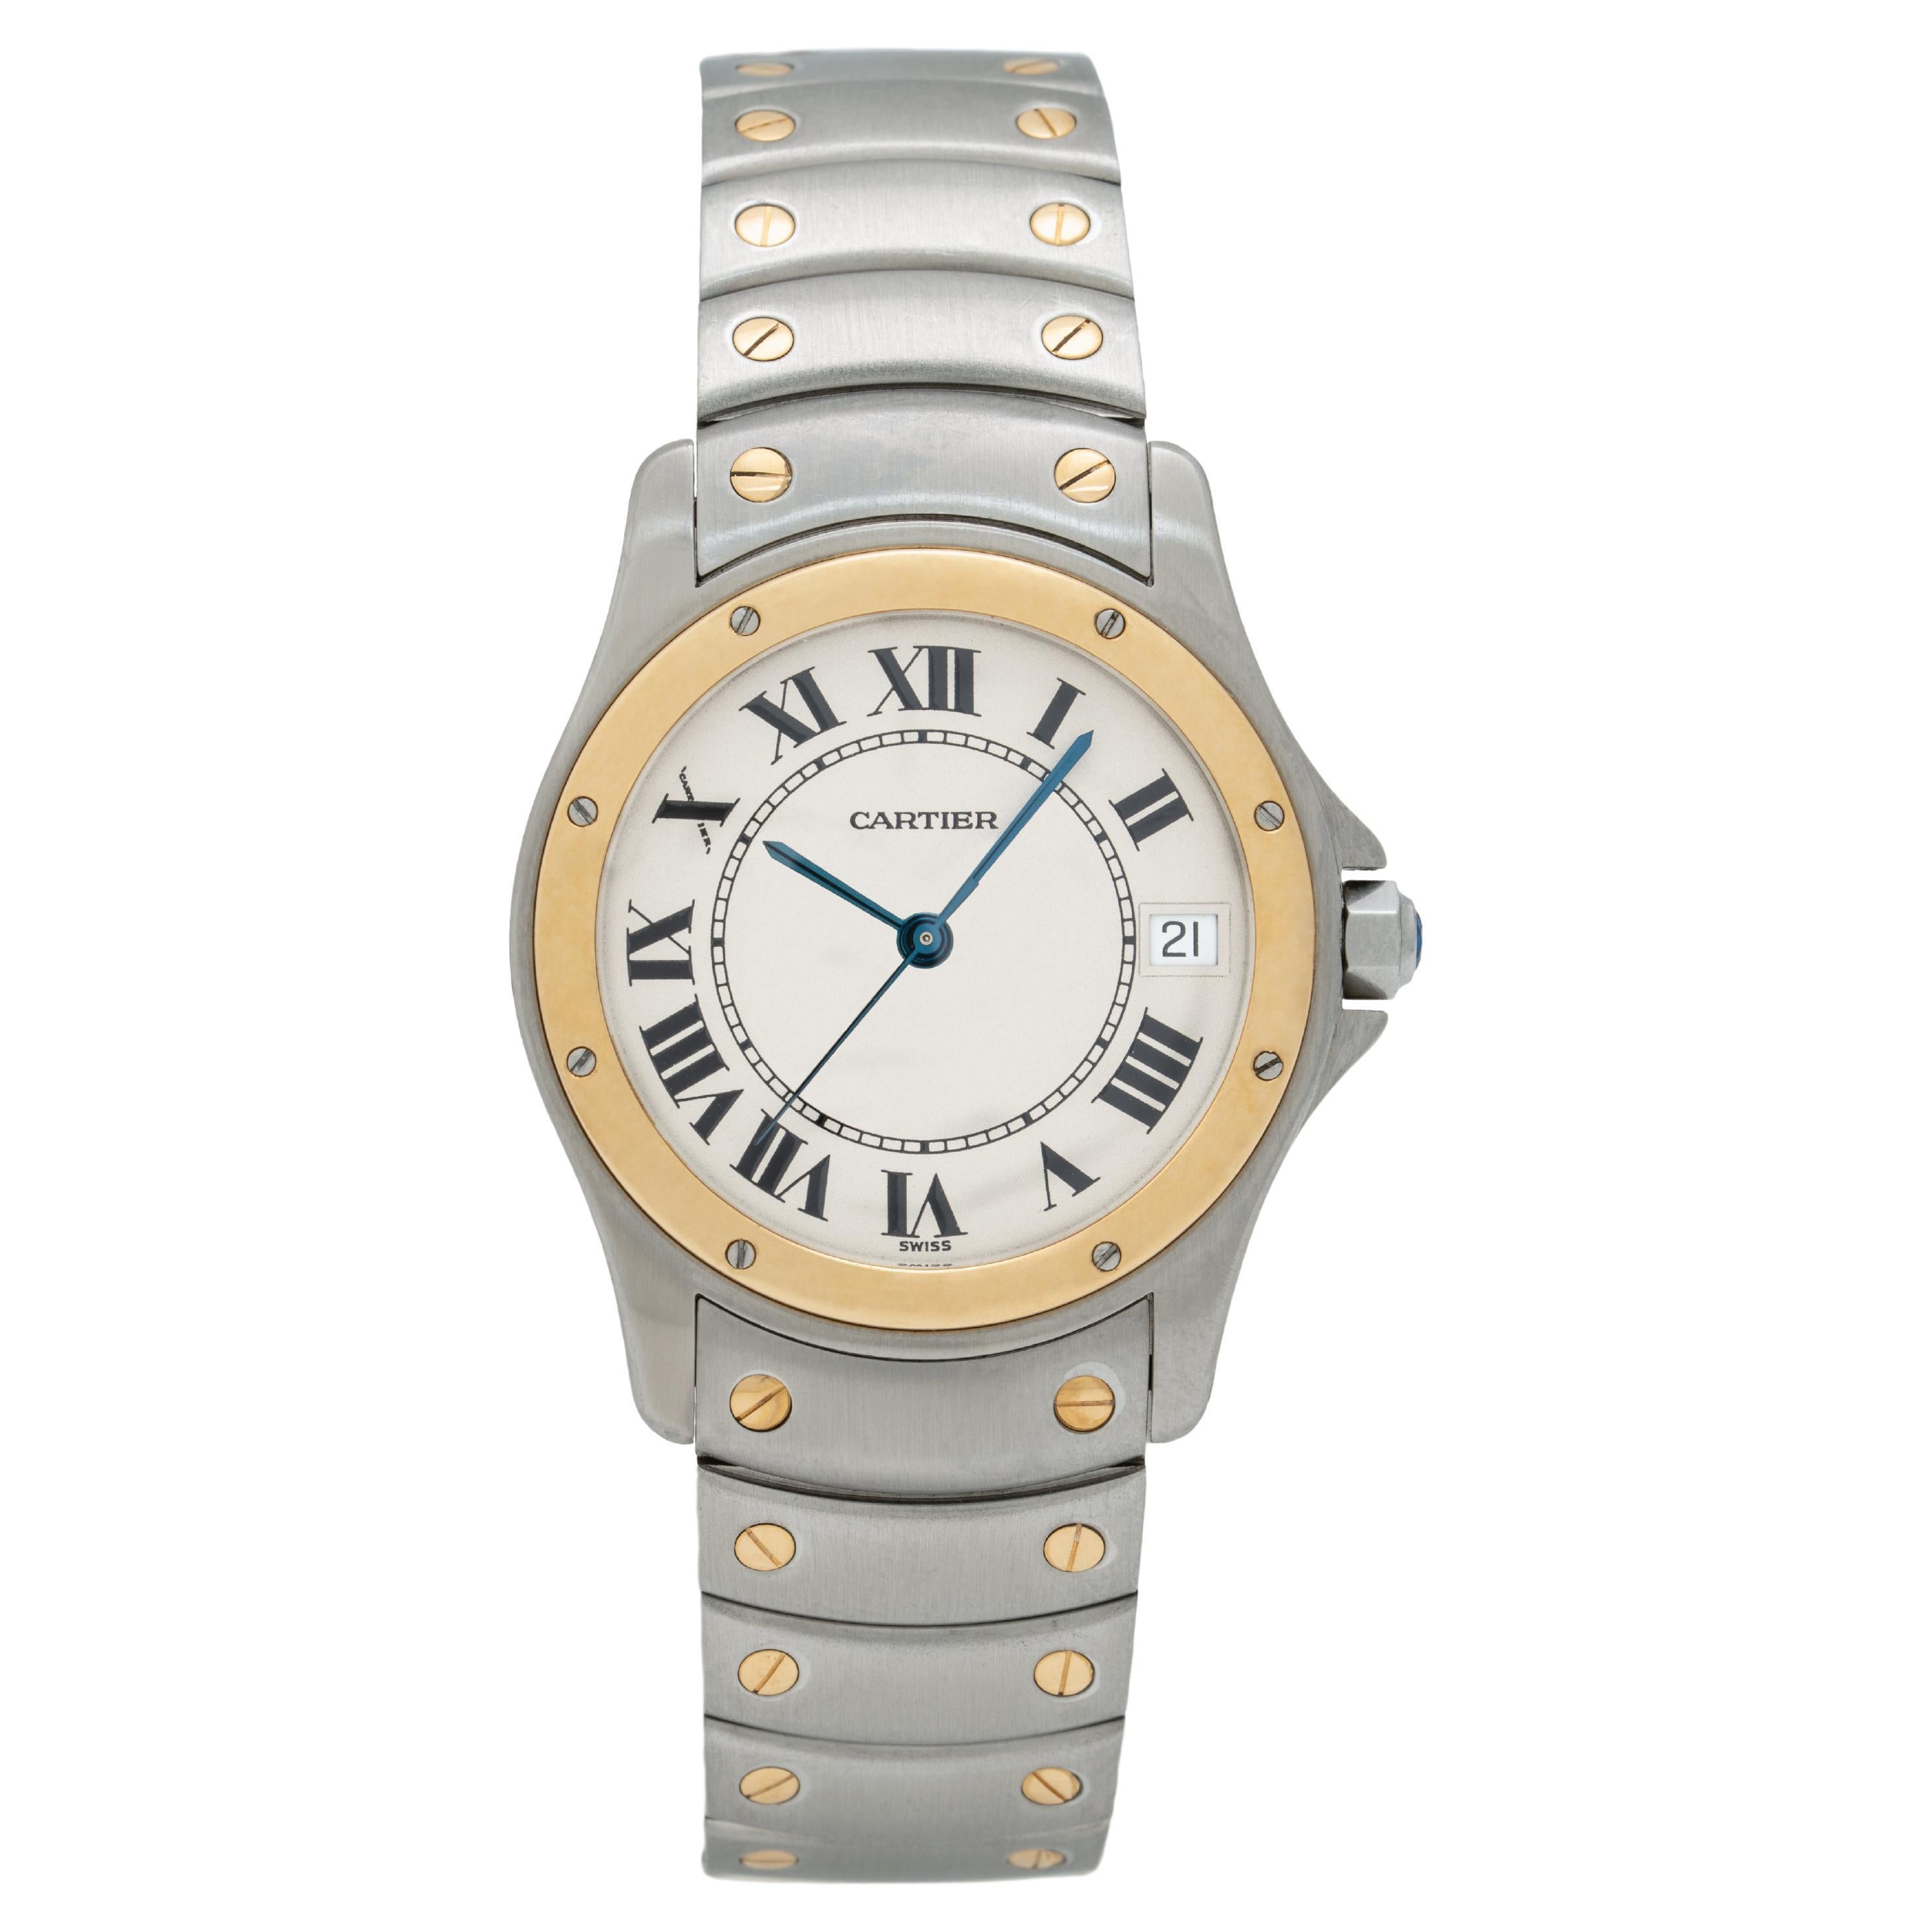 Cartier Santos Ronde 18 Karat Yellow Gold and Stainless Steel Model 1910